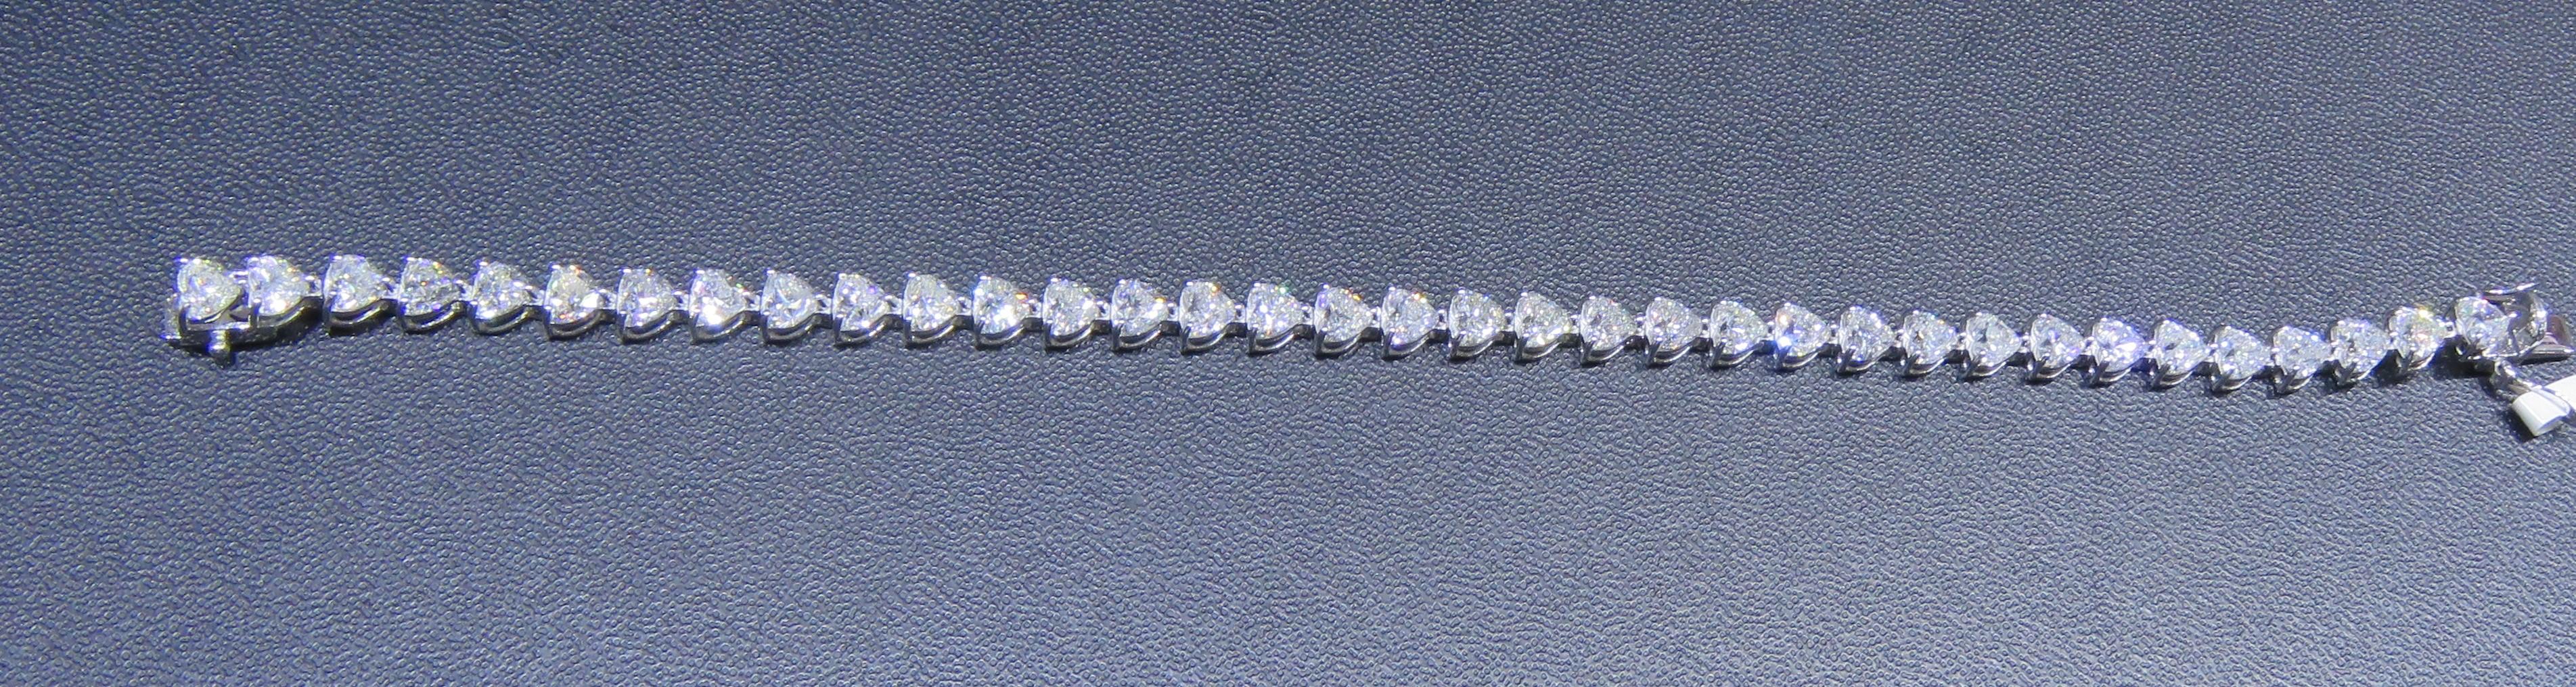 The Following Item we are offering is this Beautiful Rare Important 18KT Gold Sparkling Bracelet Tennis Bracelet. This Rare Bracelet features an Array of Magnificent Rare Diamond Hearts. T.C.W. Approx 11CTS!!
The Diamonds are of Beautiful Fine